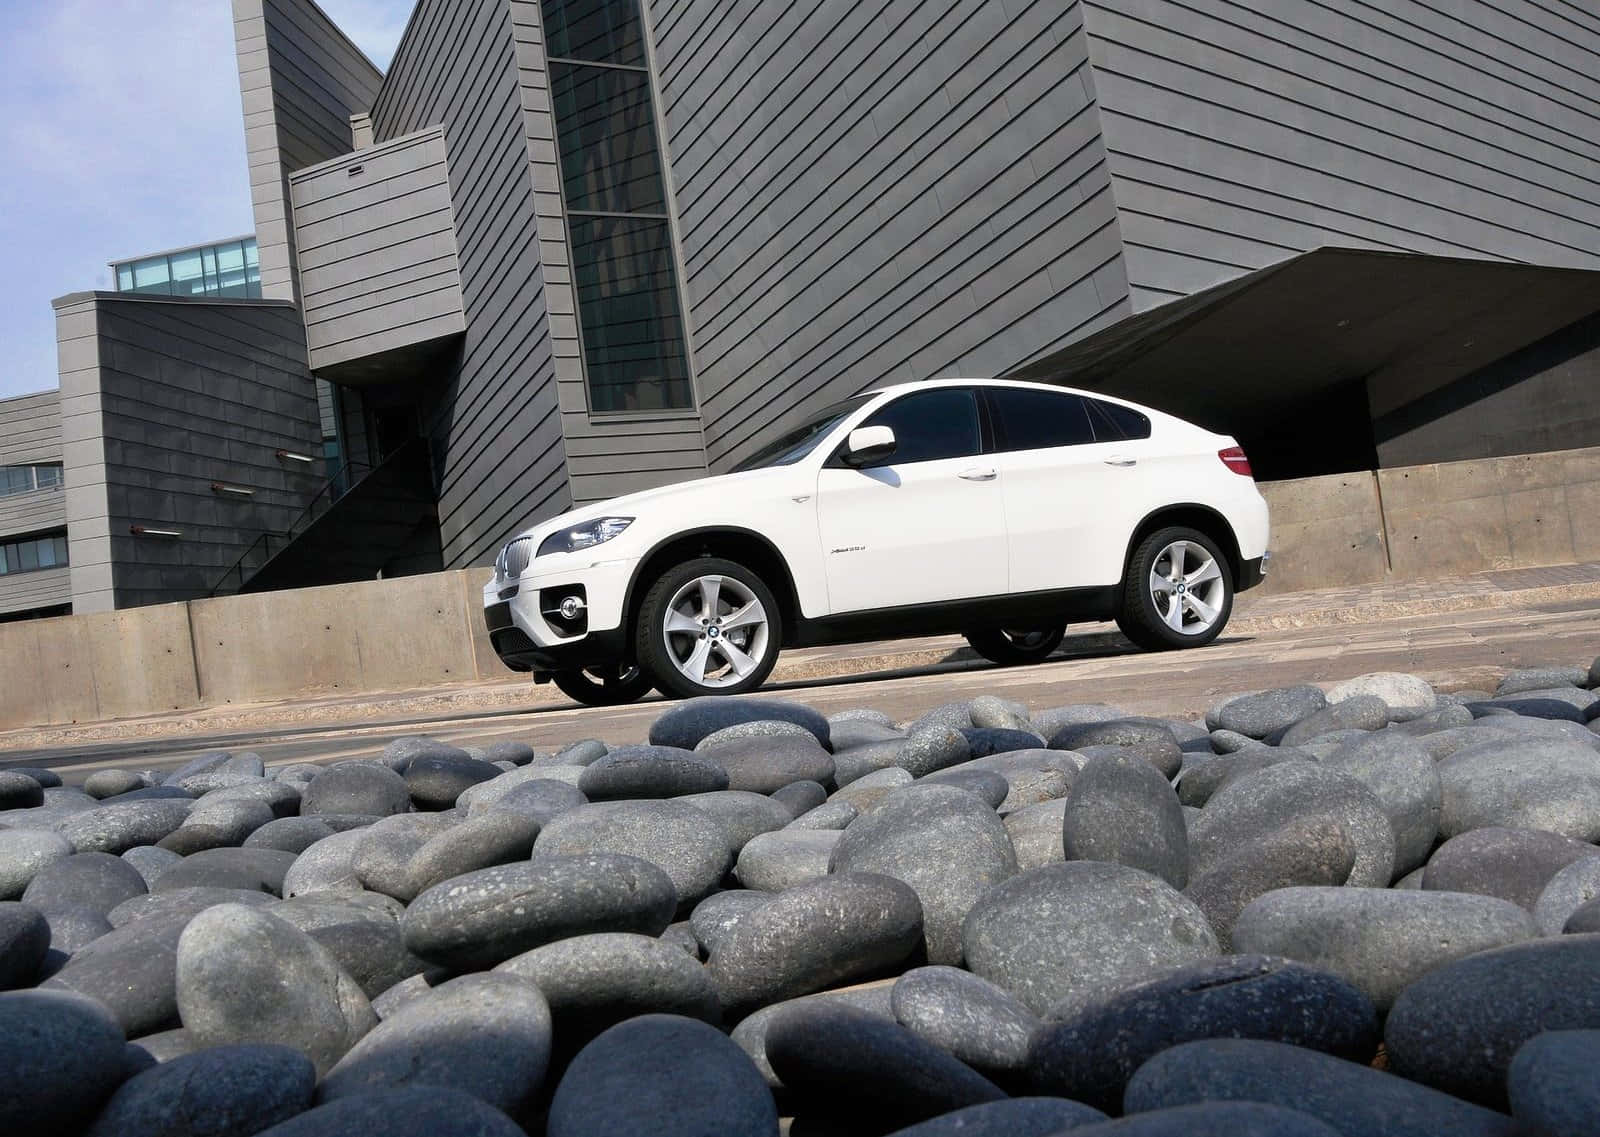 Sleek and Powerful BMW X6 in Motion Wallpaper